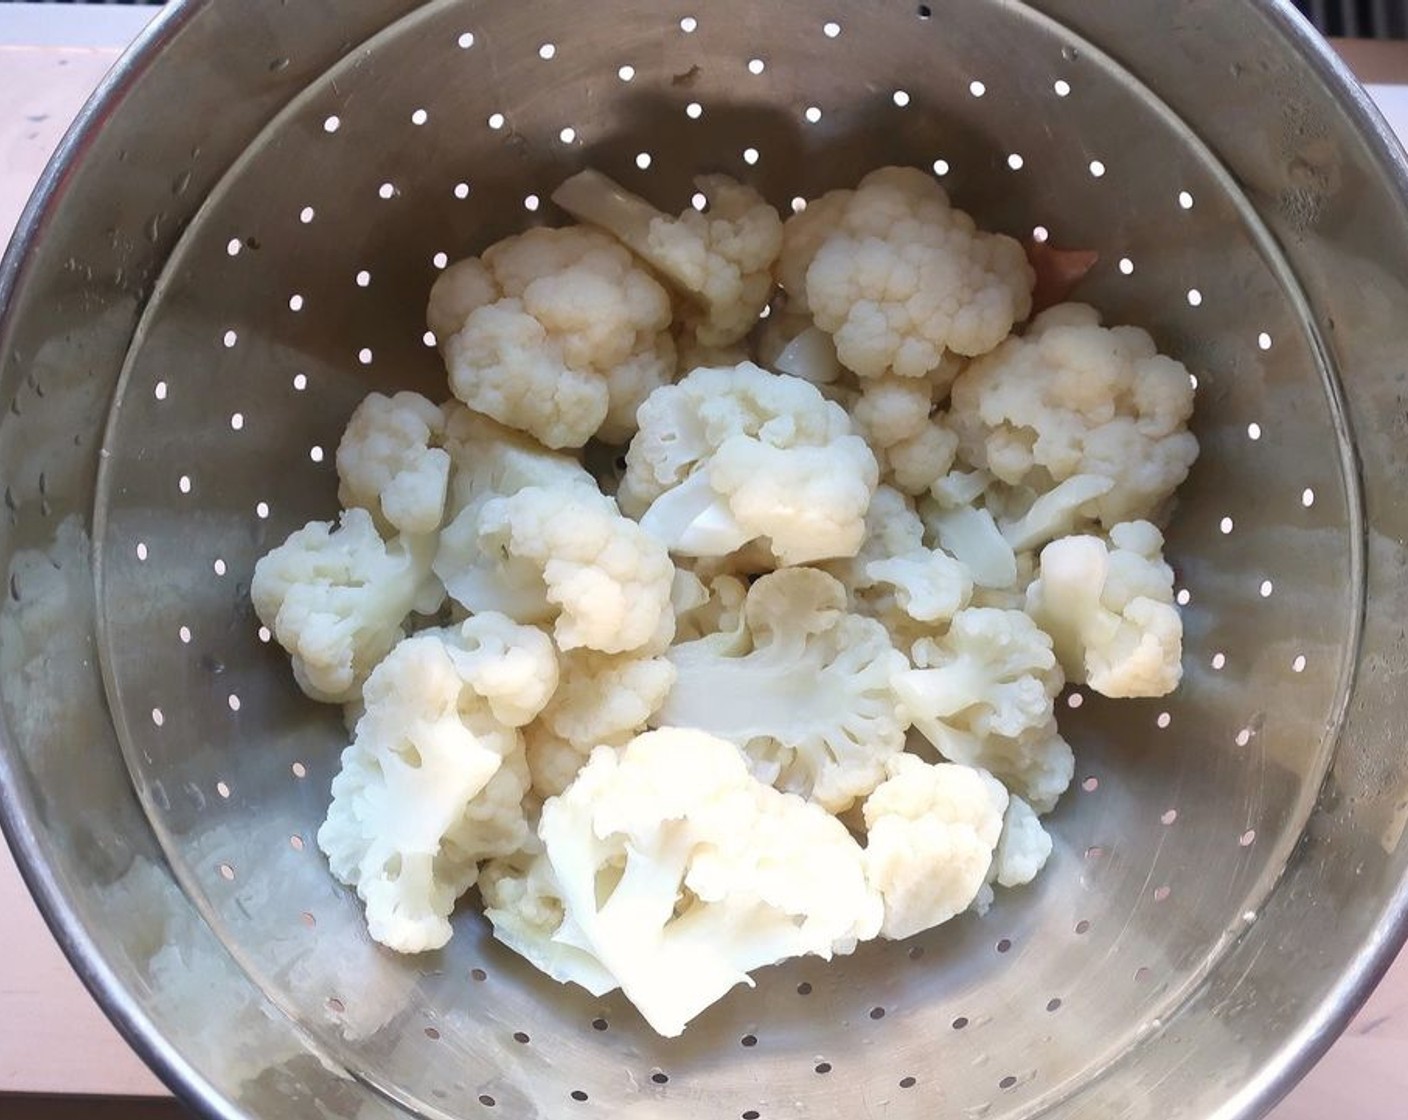 step 1 Bring a large pot of salted water to boil over high heat, then add the Cauliflower Florets (2 cups). Let cook for about a minute, then drain and rinse under cold water. This is called blanching. If you prefer your cauliflower softer, you can cook it for a bit longer before rinsing.